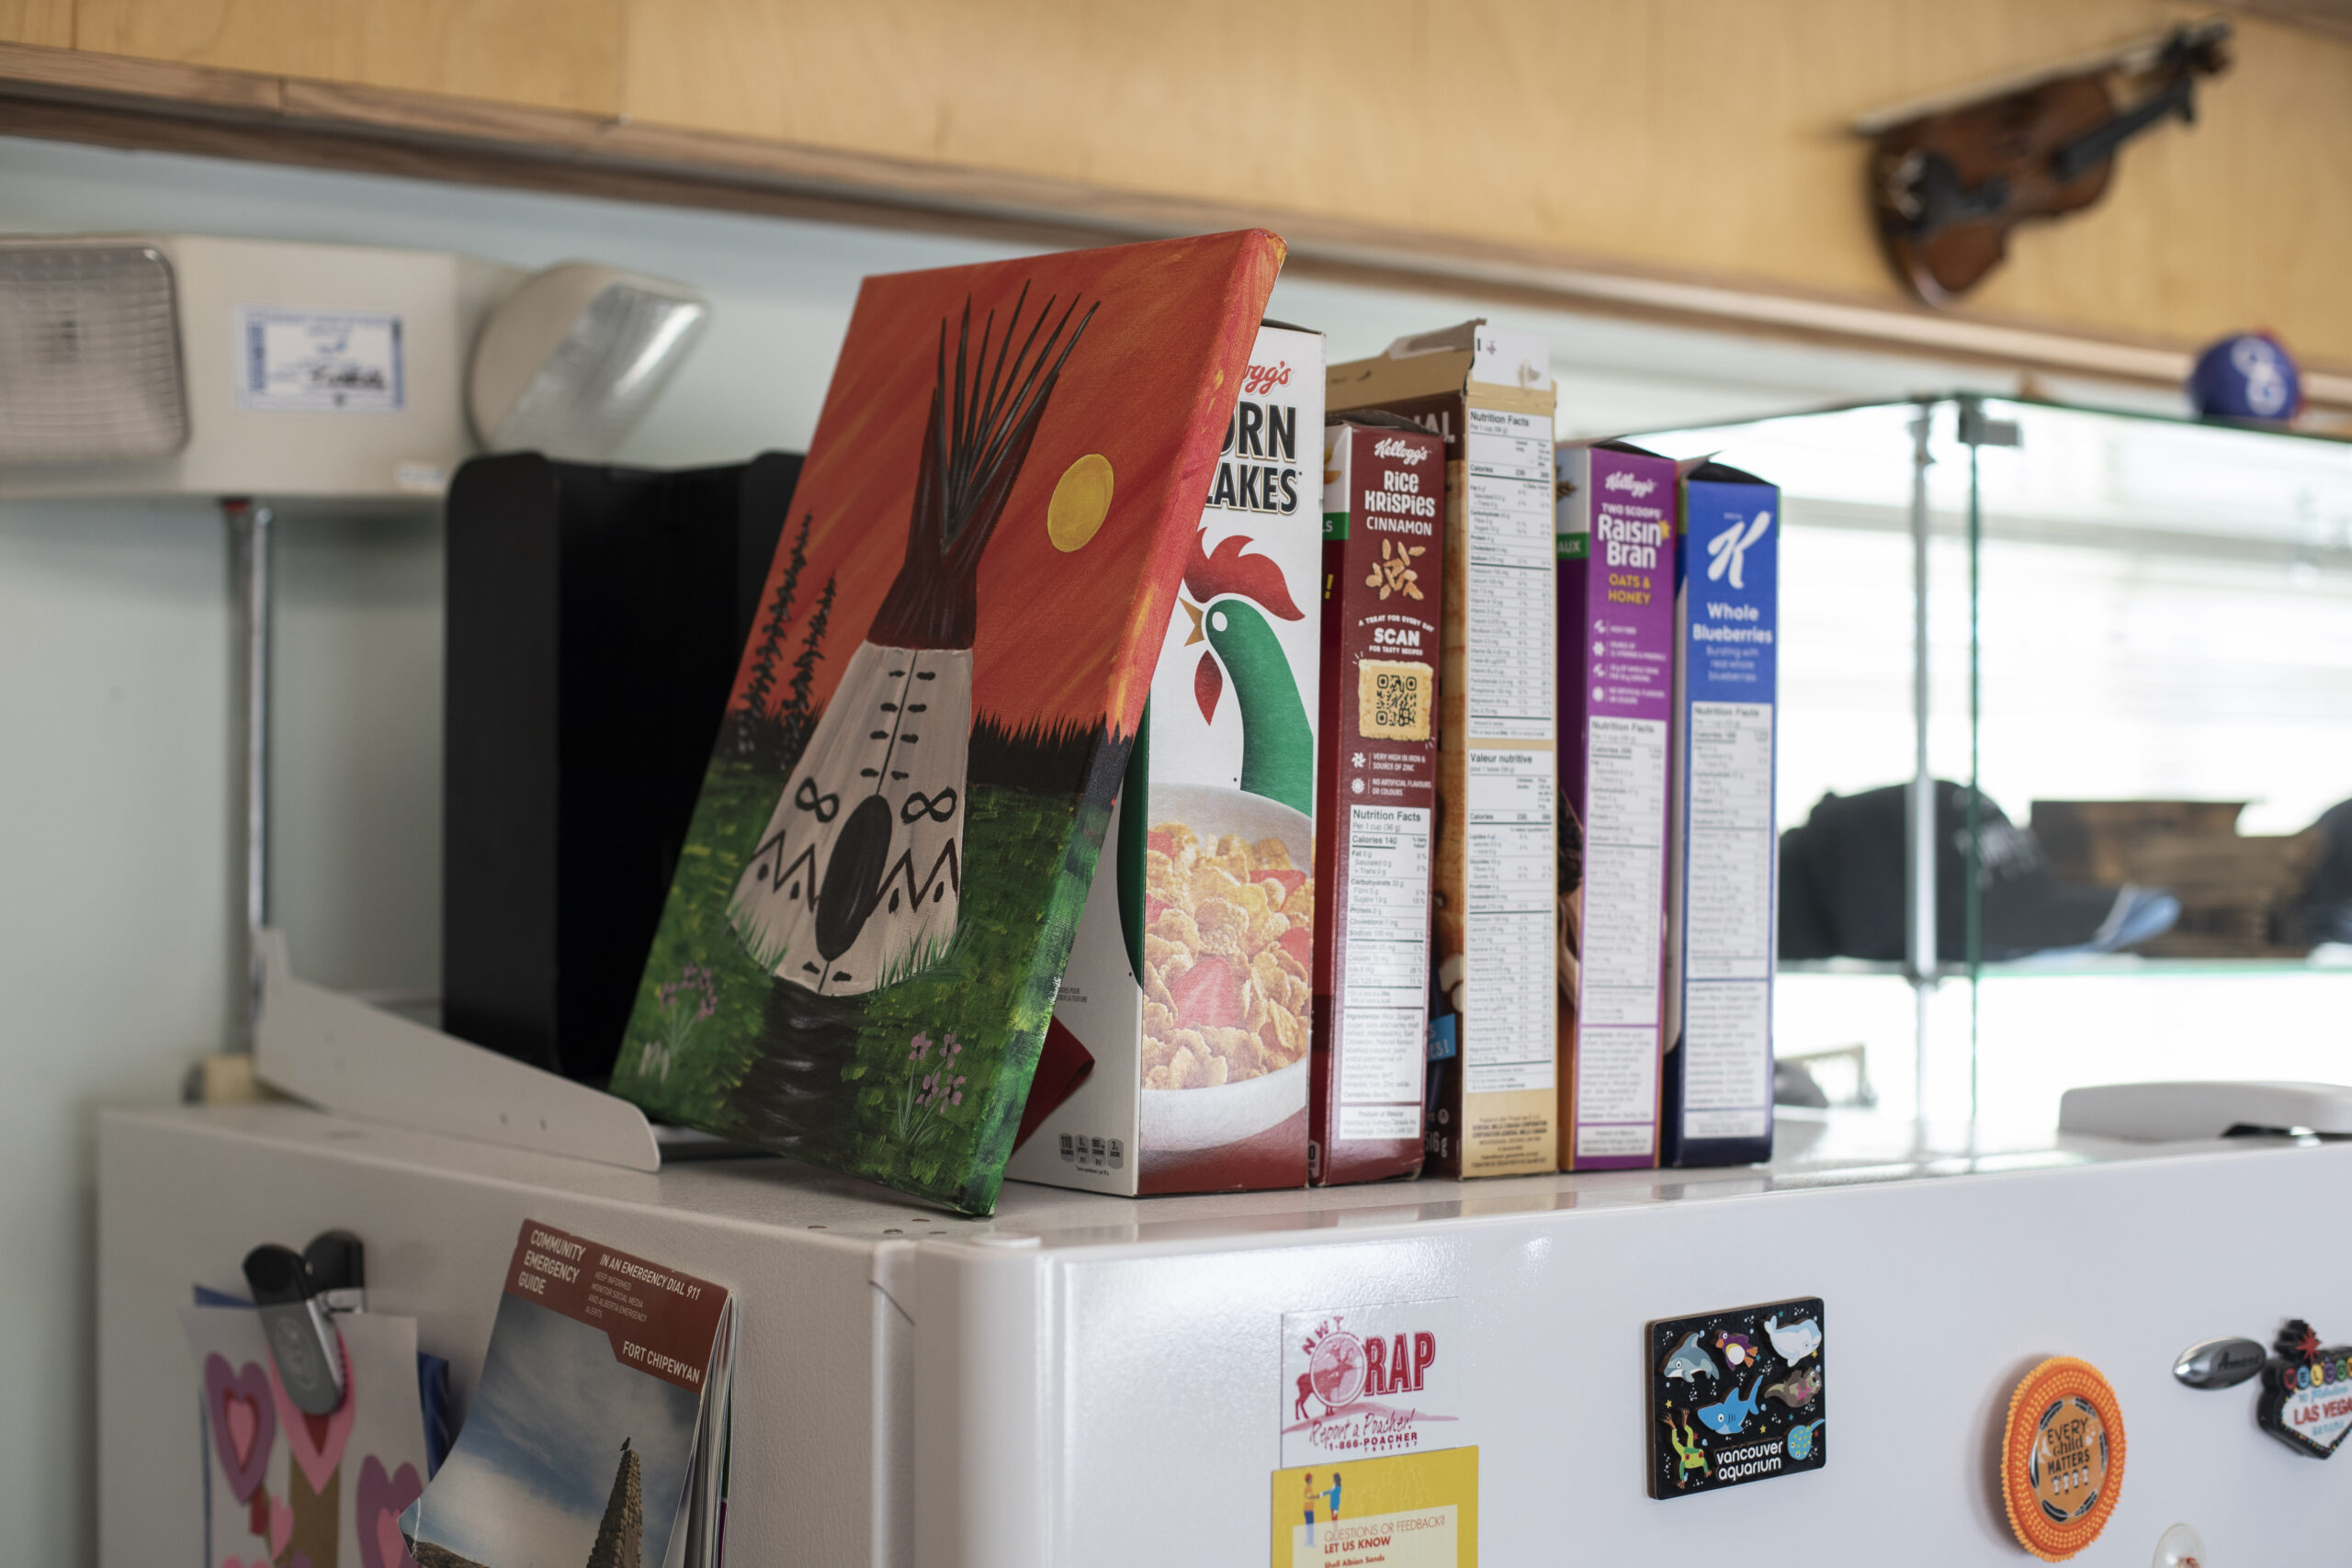 Cereal boxes are stacked on the top of a white fridge.